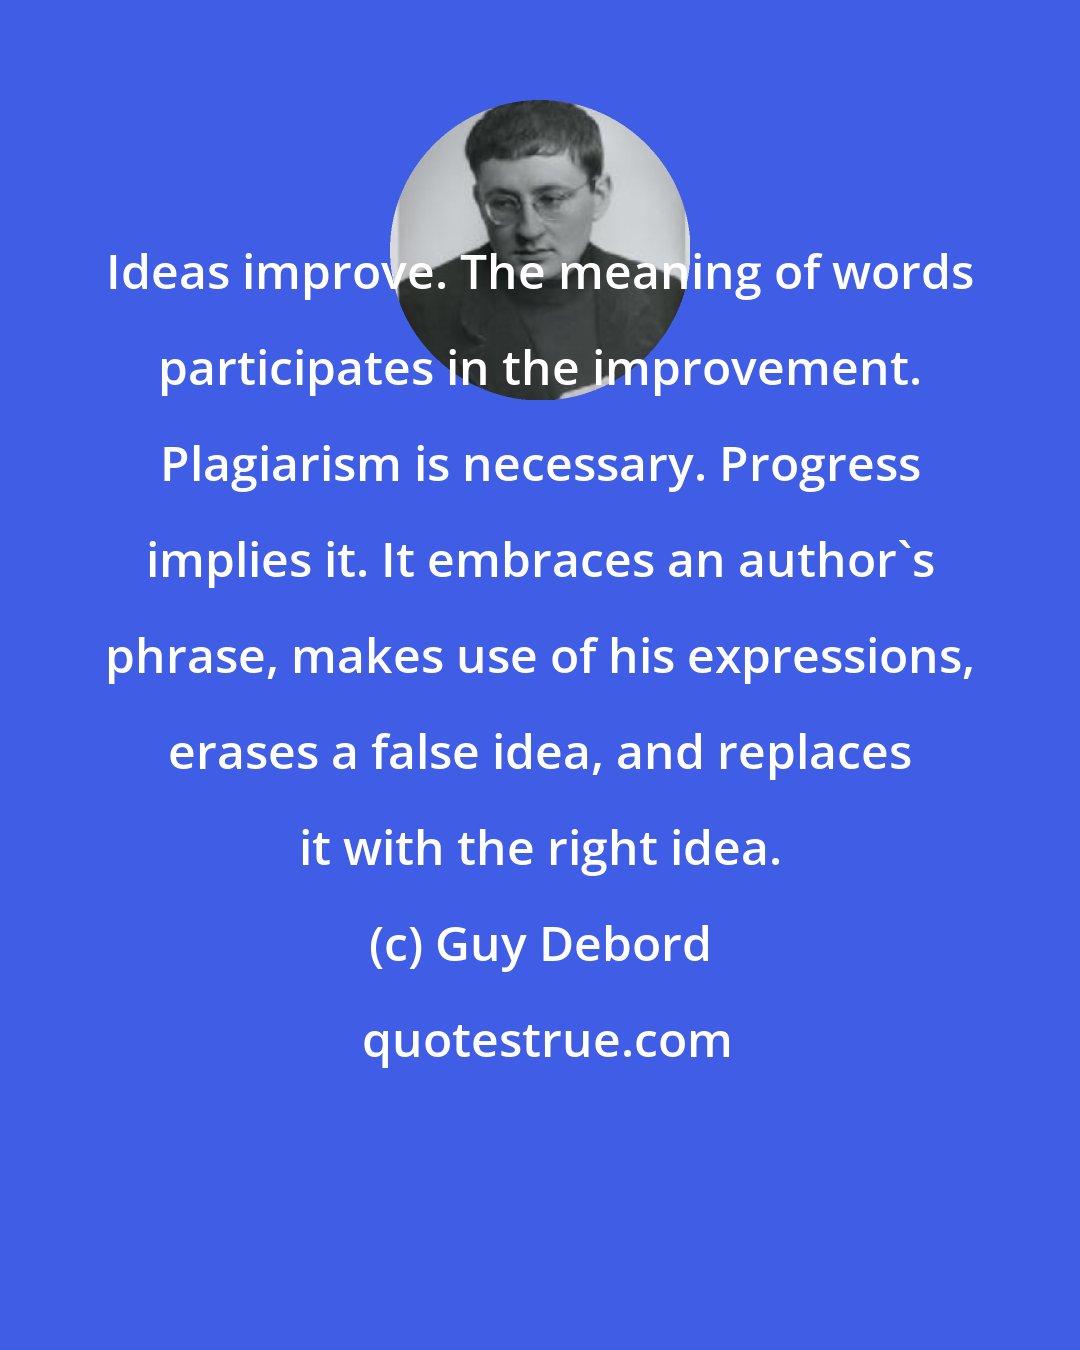 Guy Debord: Ideas improve. The meaning of words participates in the improvement. Plagiarism is necessary. Progress implies it. It embraces an author's phrase, makes use of his expressions, erases a false idea, and replaces it with the right idea.